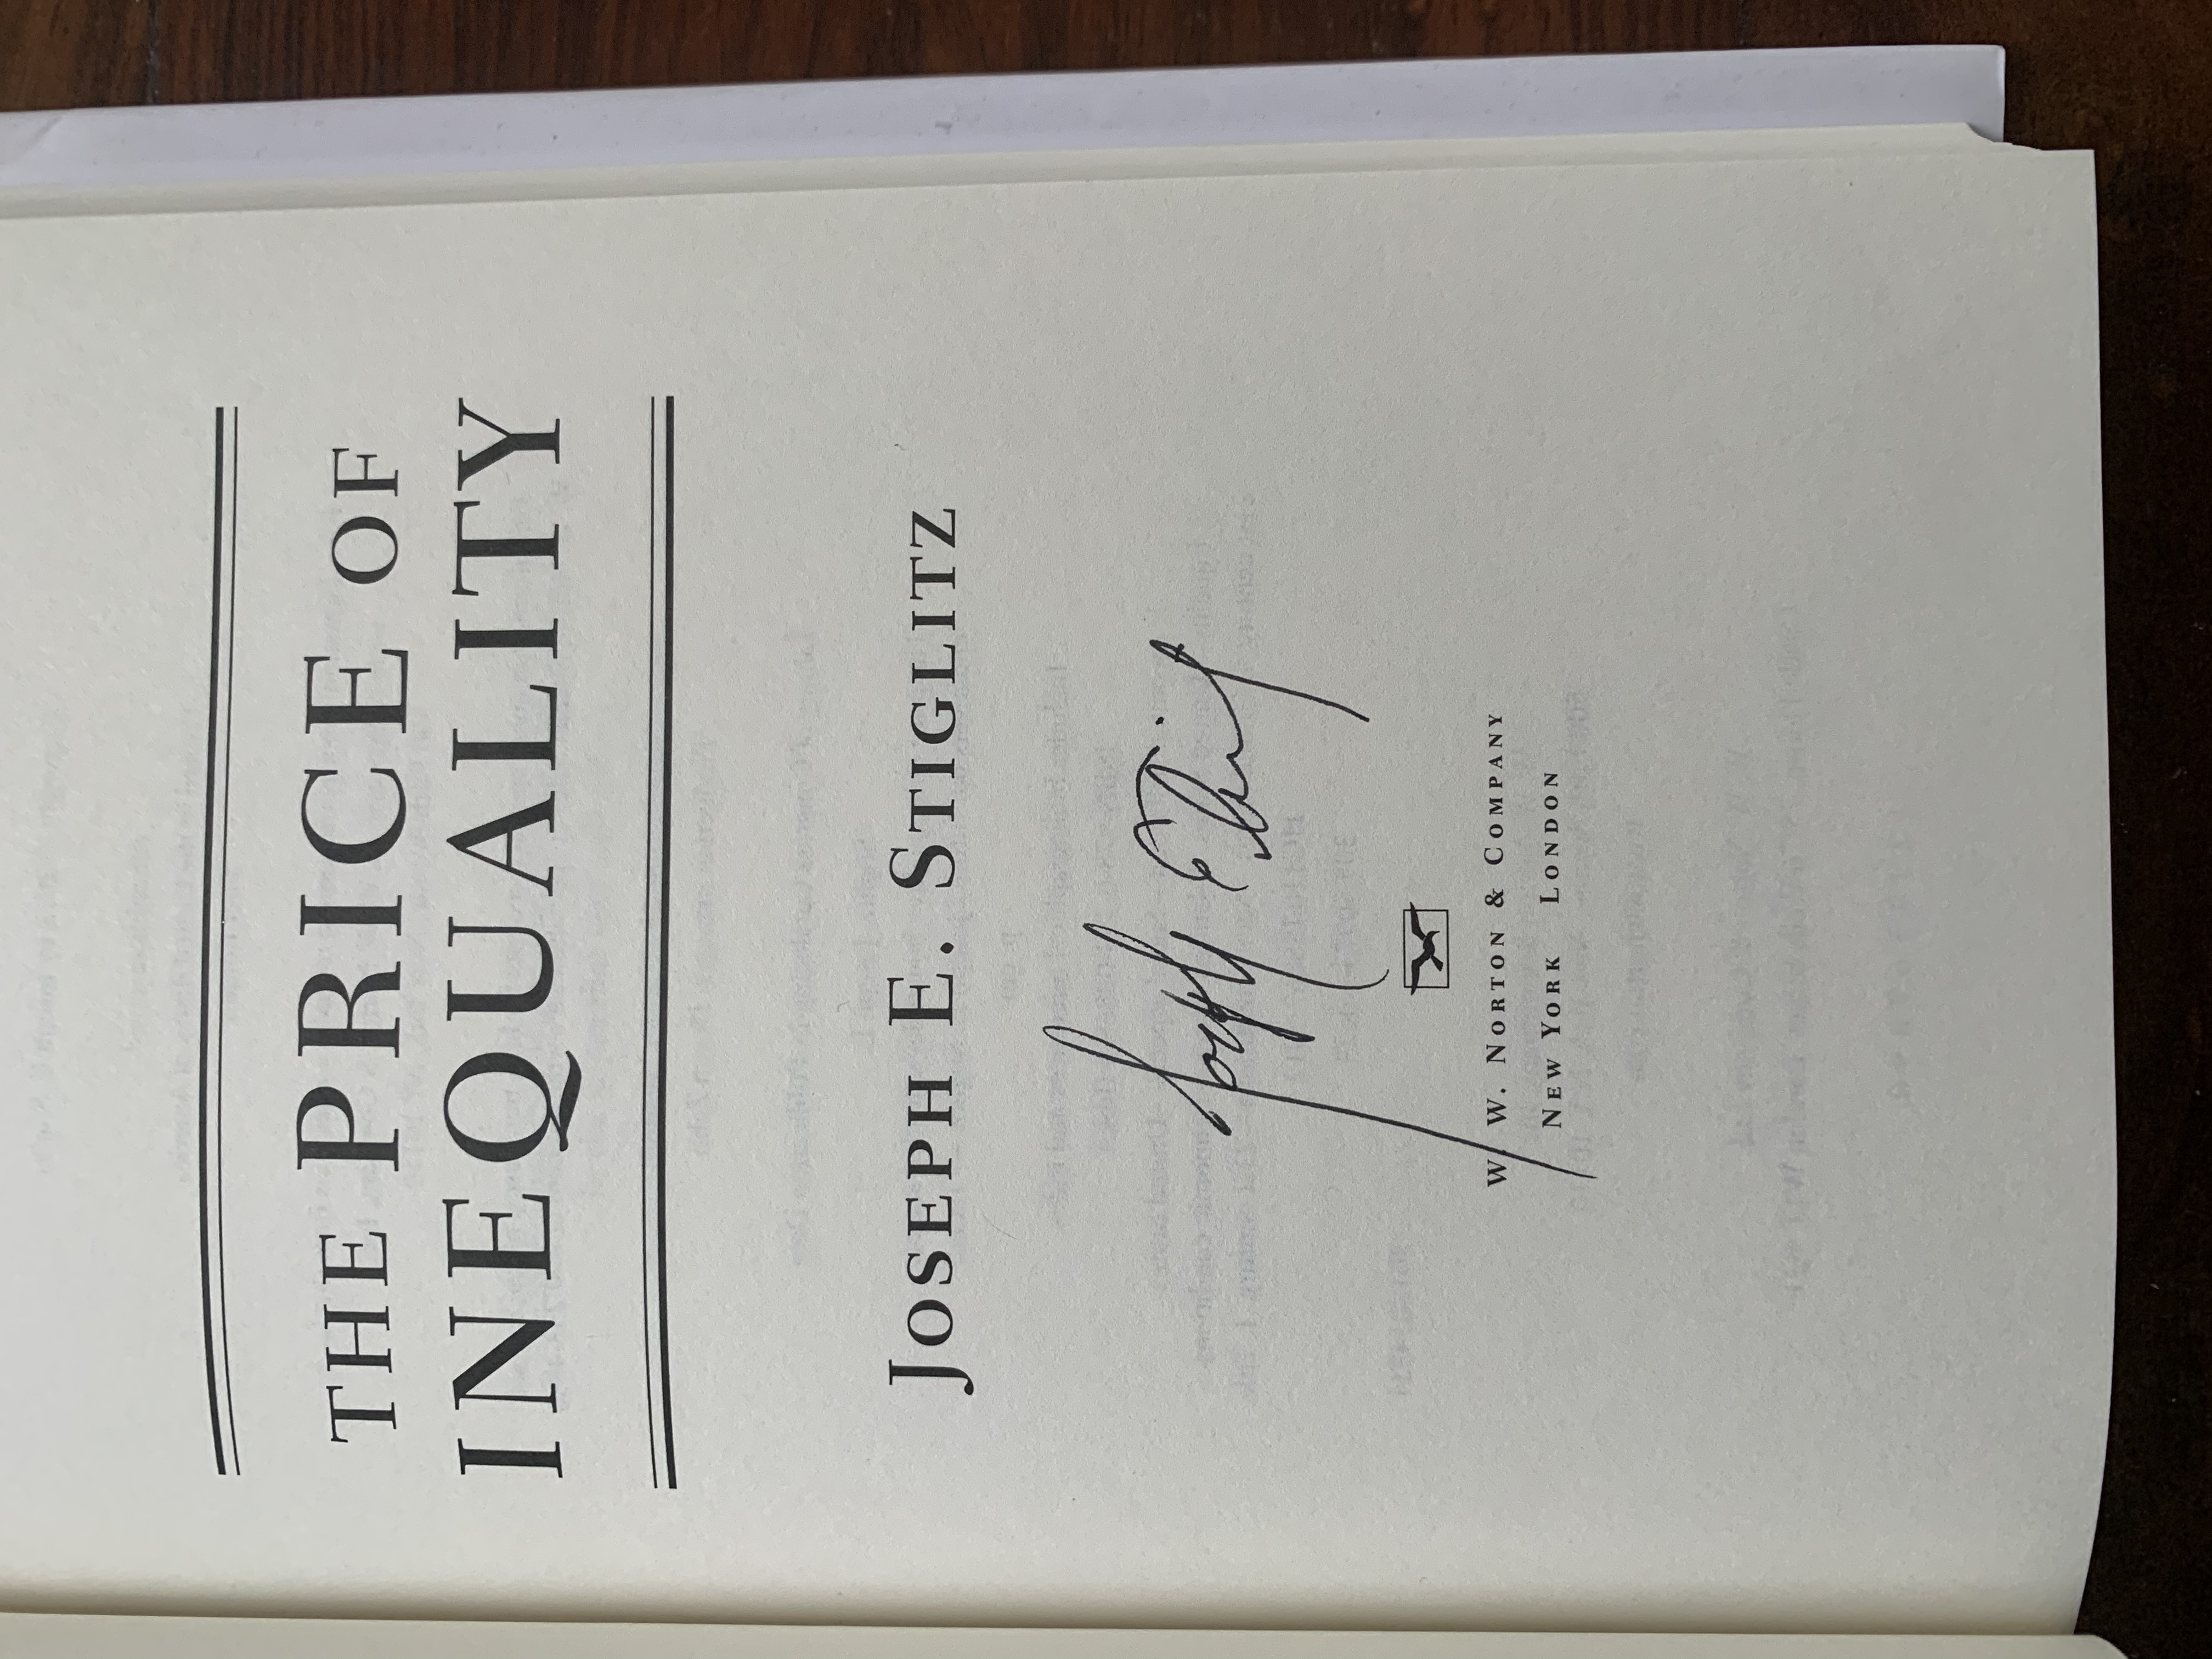 E.:　Joseph　Fine　Signed　of　SIGNED　How　Edition,　Price　Our　Endangers　Today's　Future　Divided　1st　The　(2012)　Author(s)　by　Stiglitz,　Inequality:　by　Mungobooks　Society　Hardcover